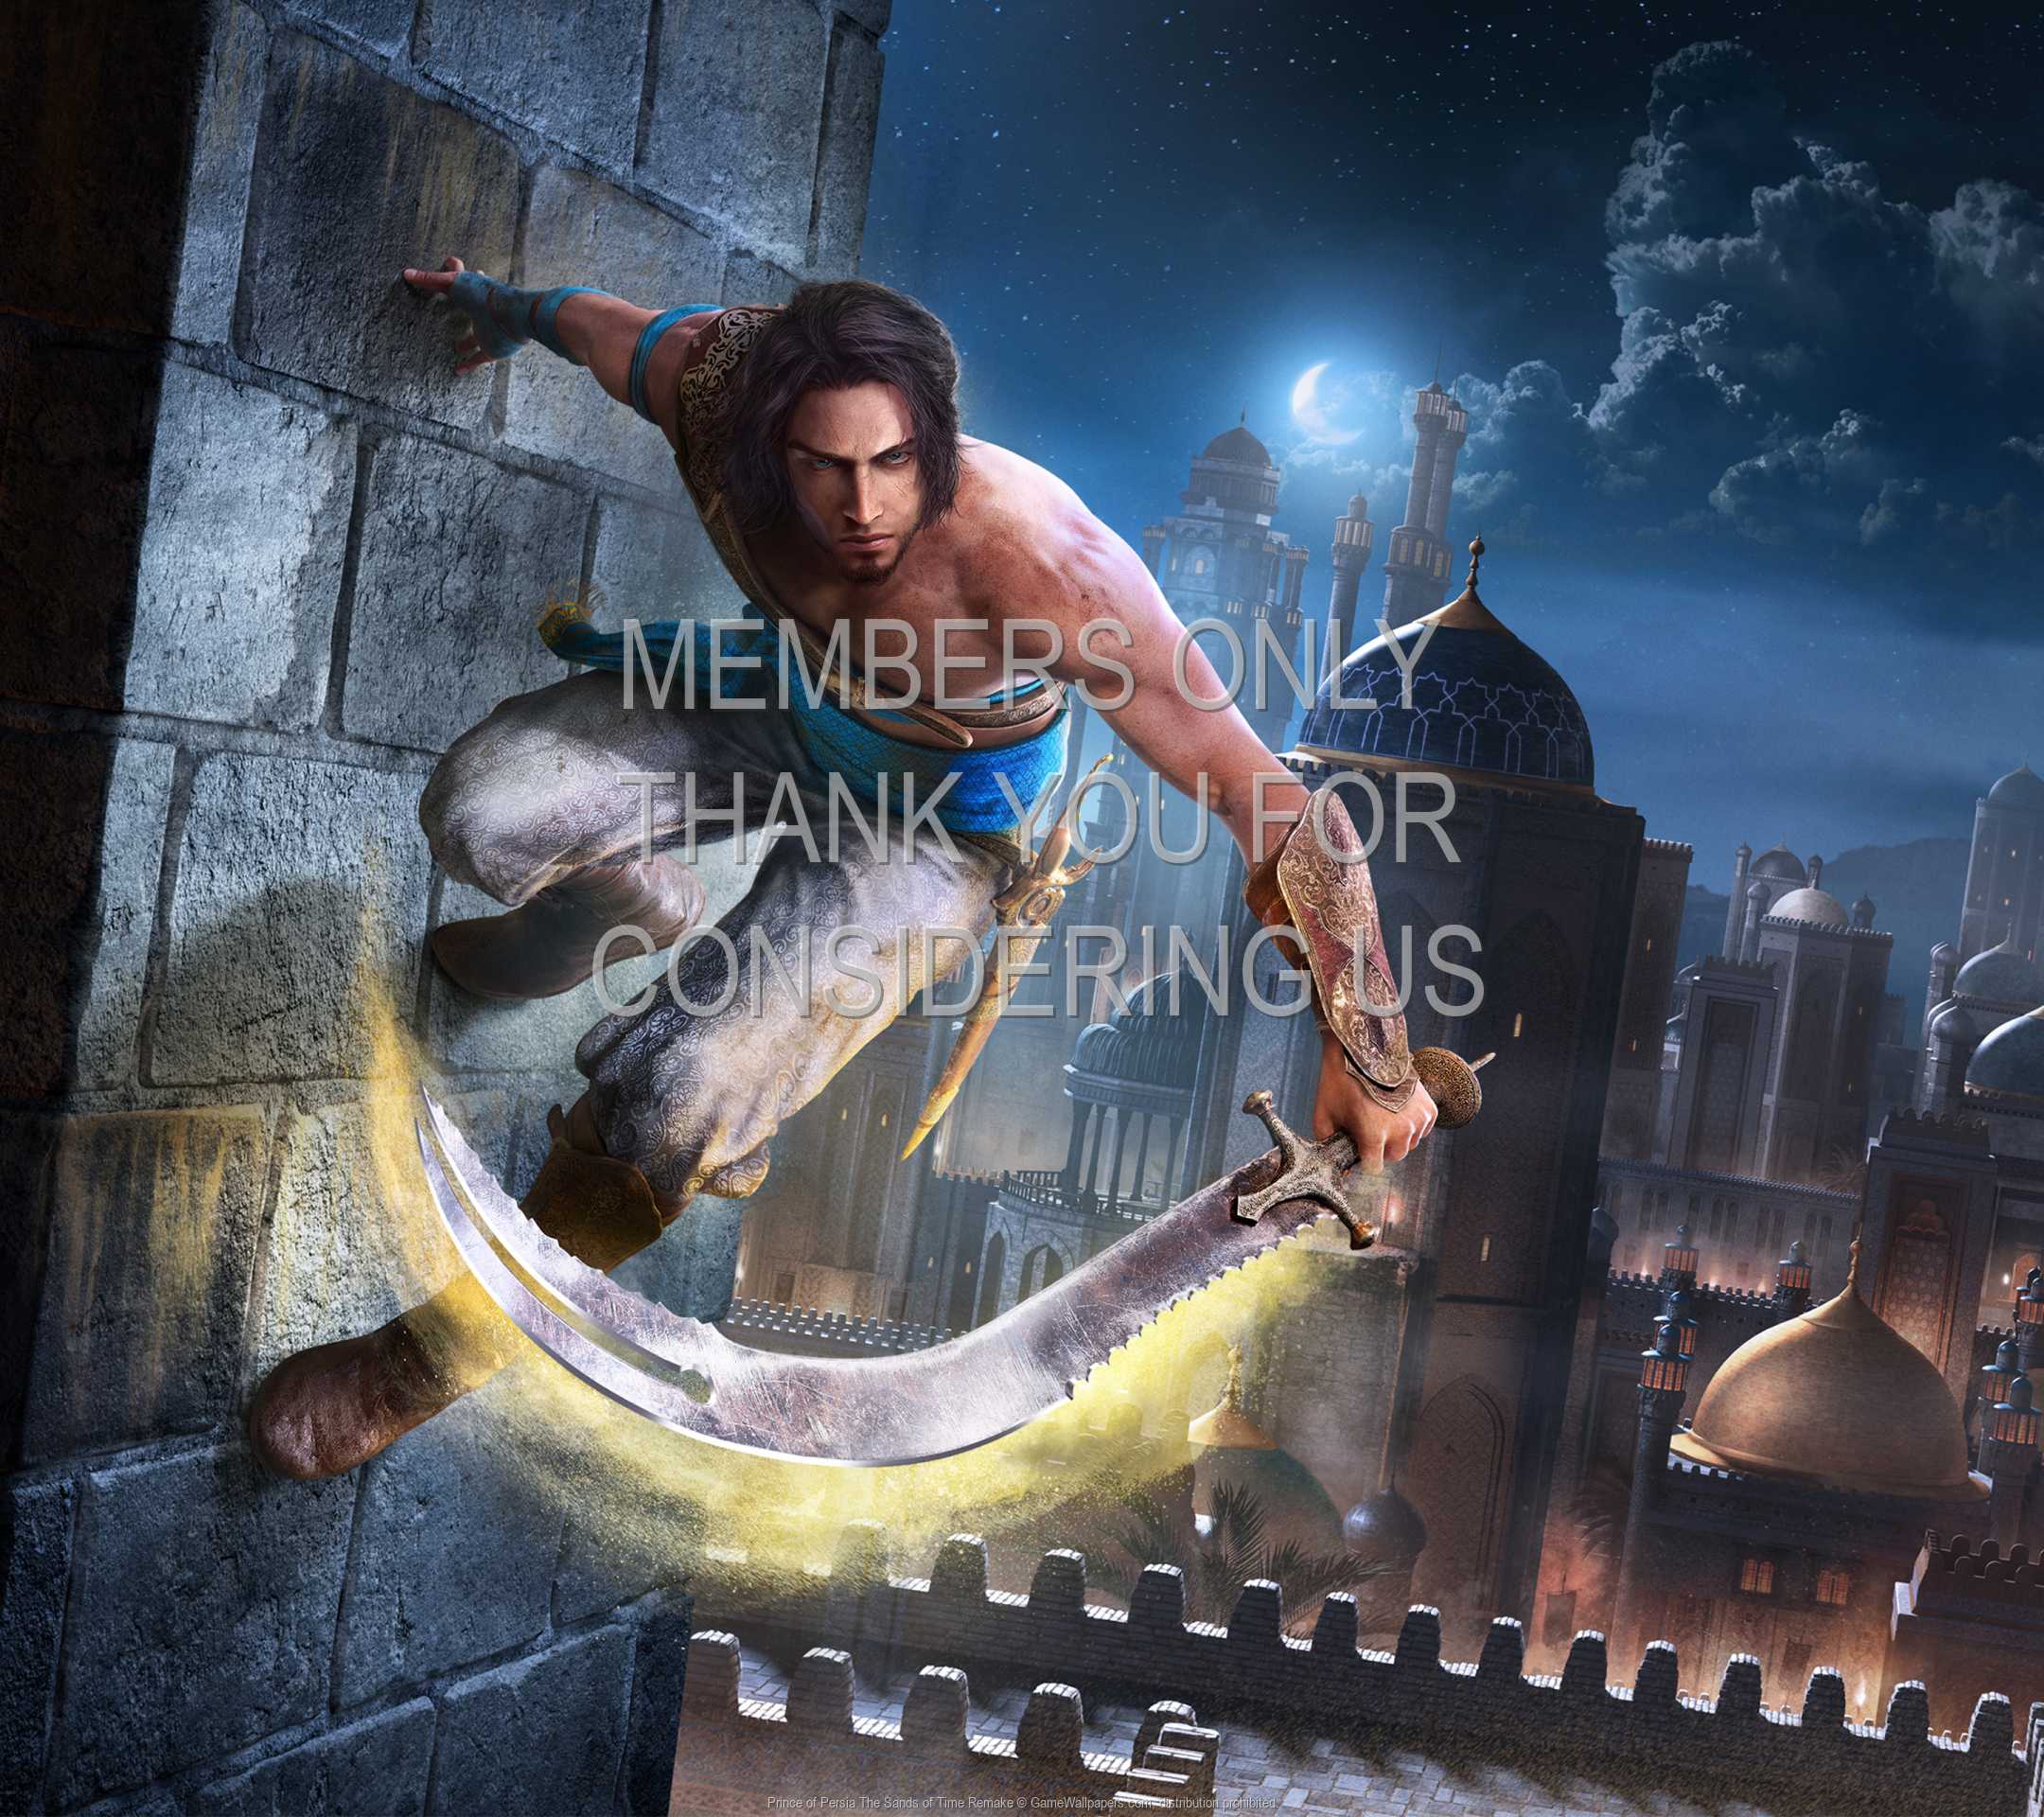 Prince of Persia: The Sands of Time Remake 1080p Horizontal Mobile fond d'cran 01